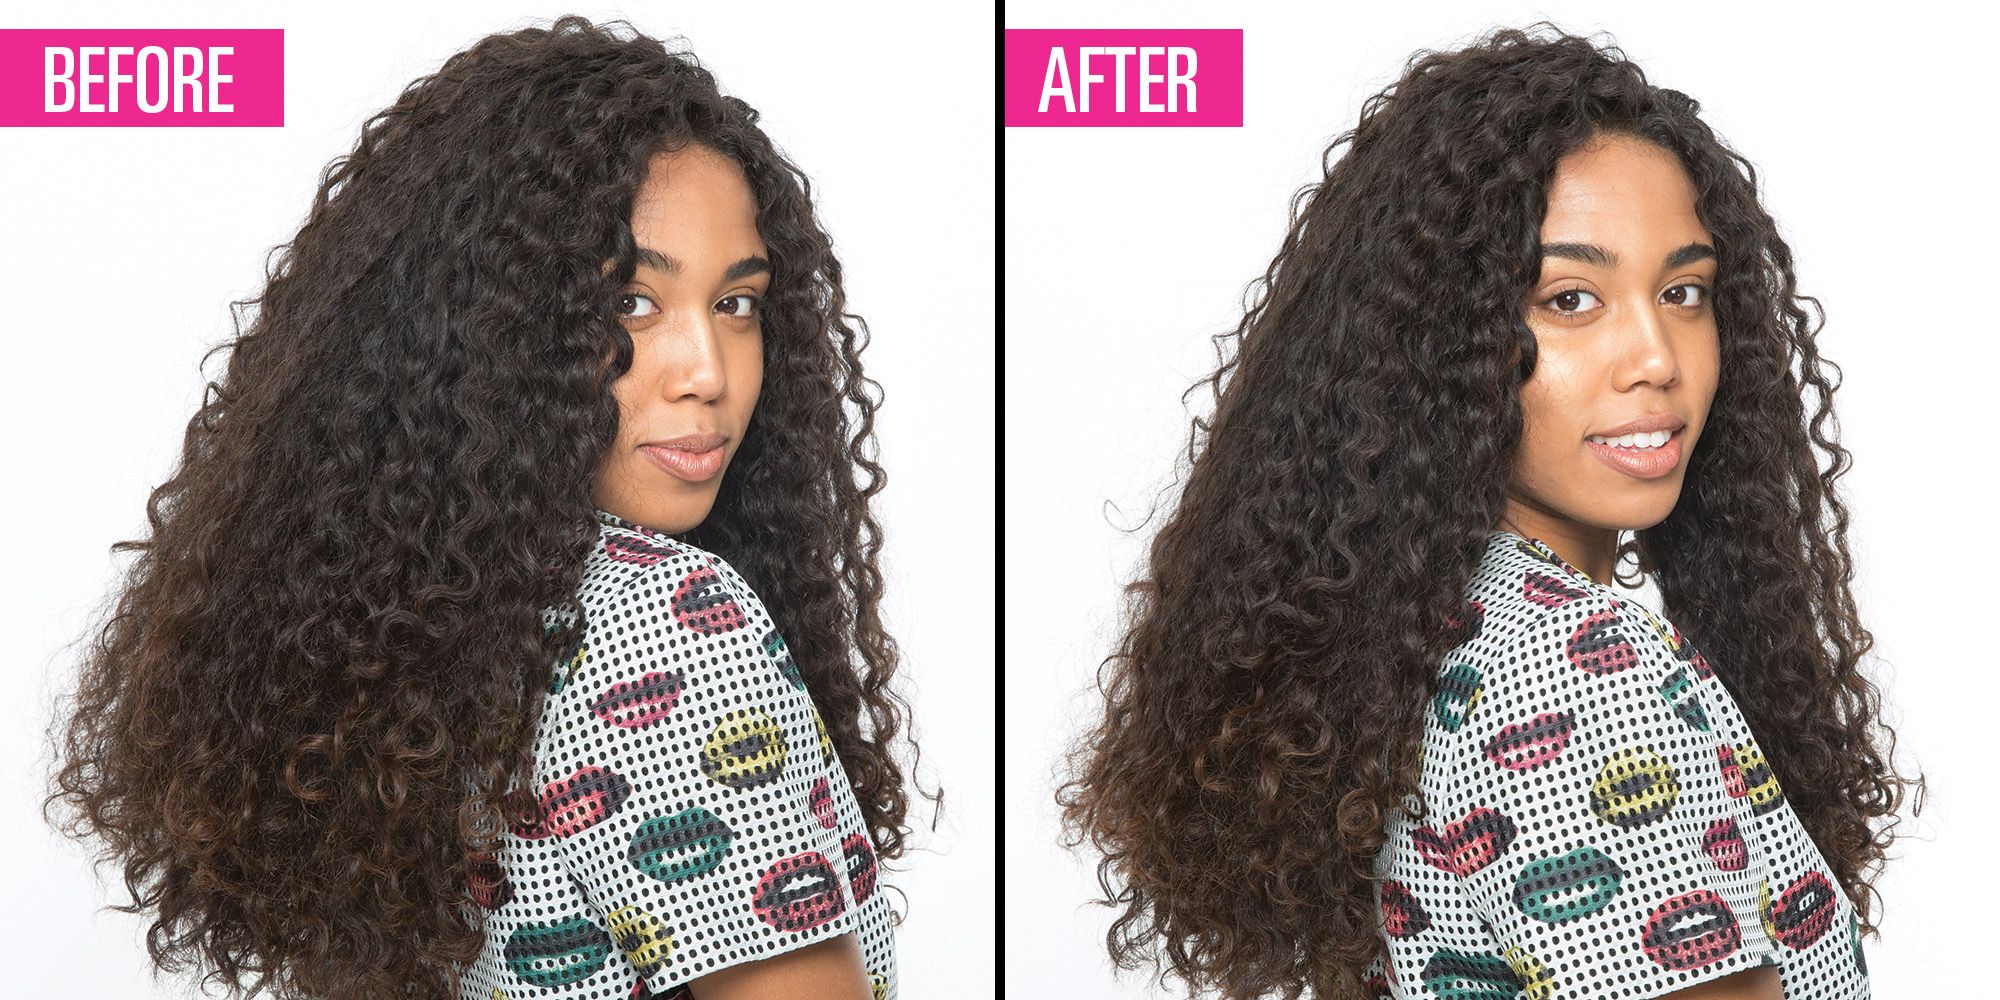 The Genius Way to Thin Out Super Thick Hair Without Getting An Undercut